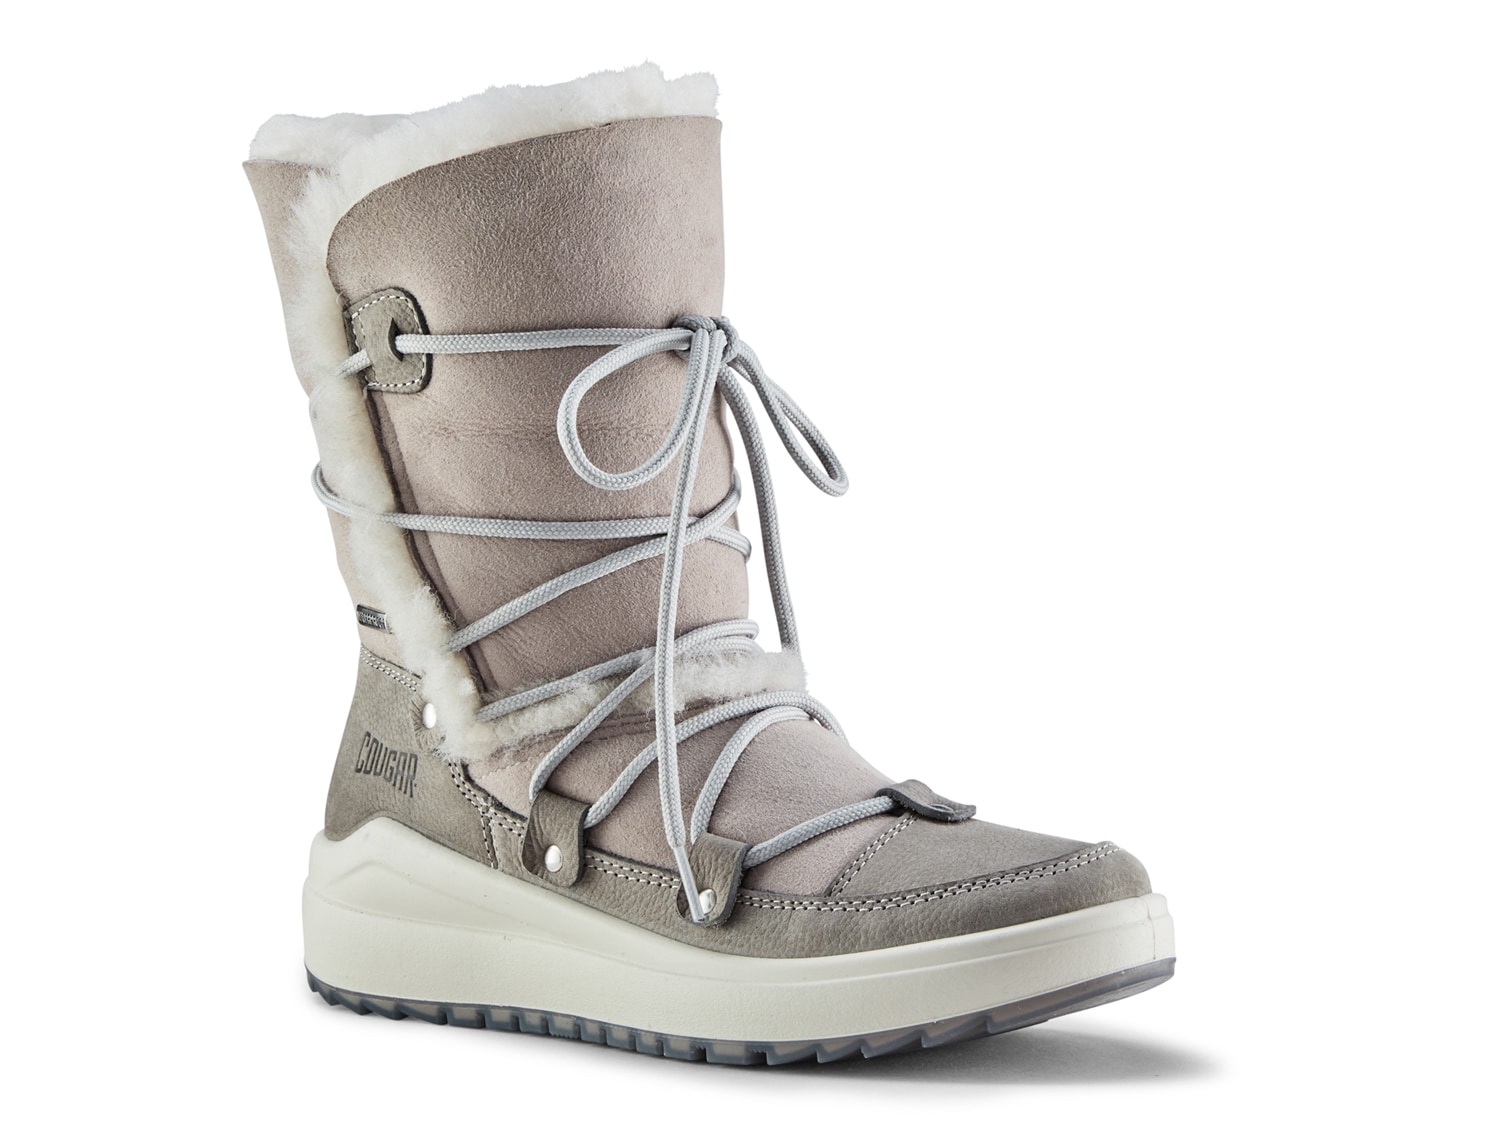 Cougar Tacoma Snow Boot - Free Shipping | DSW